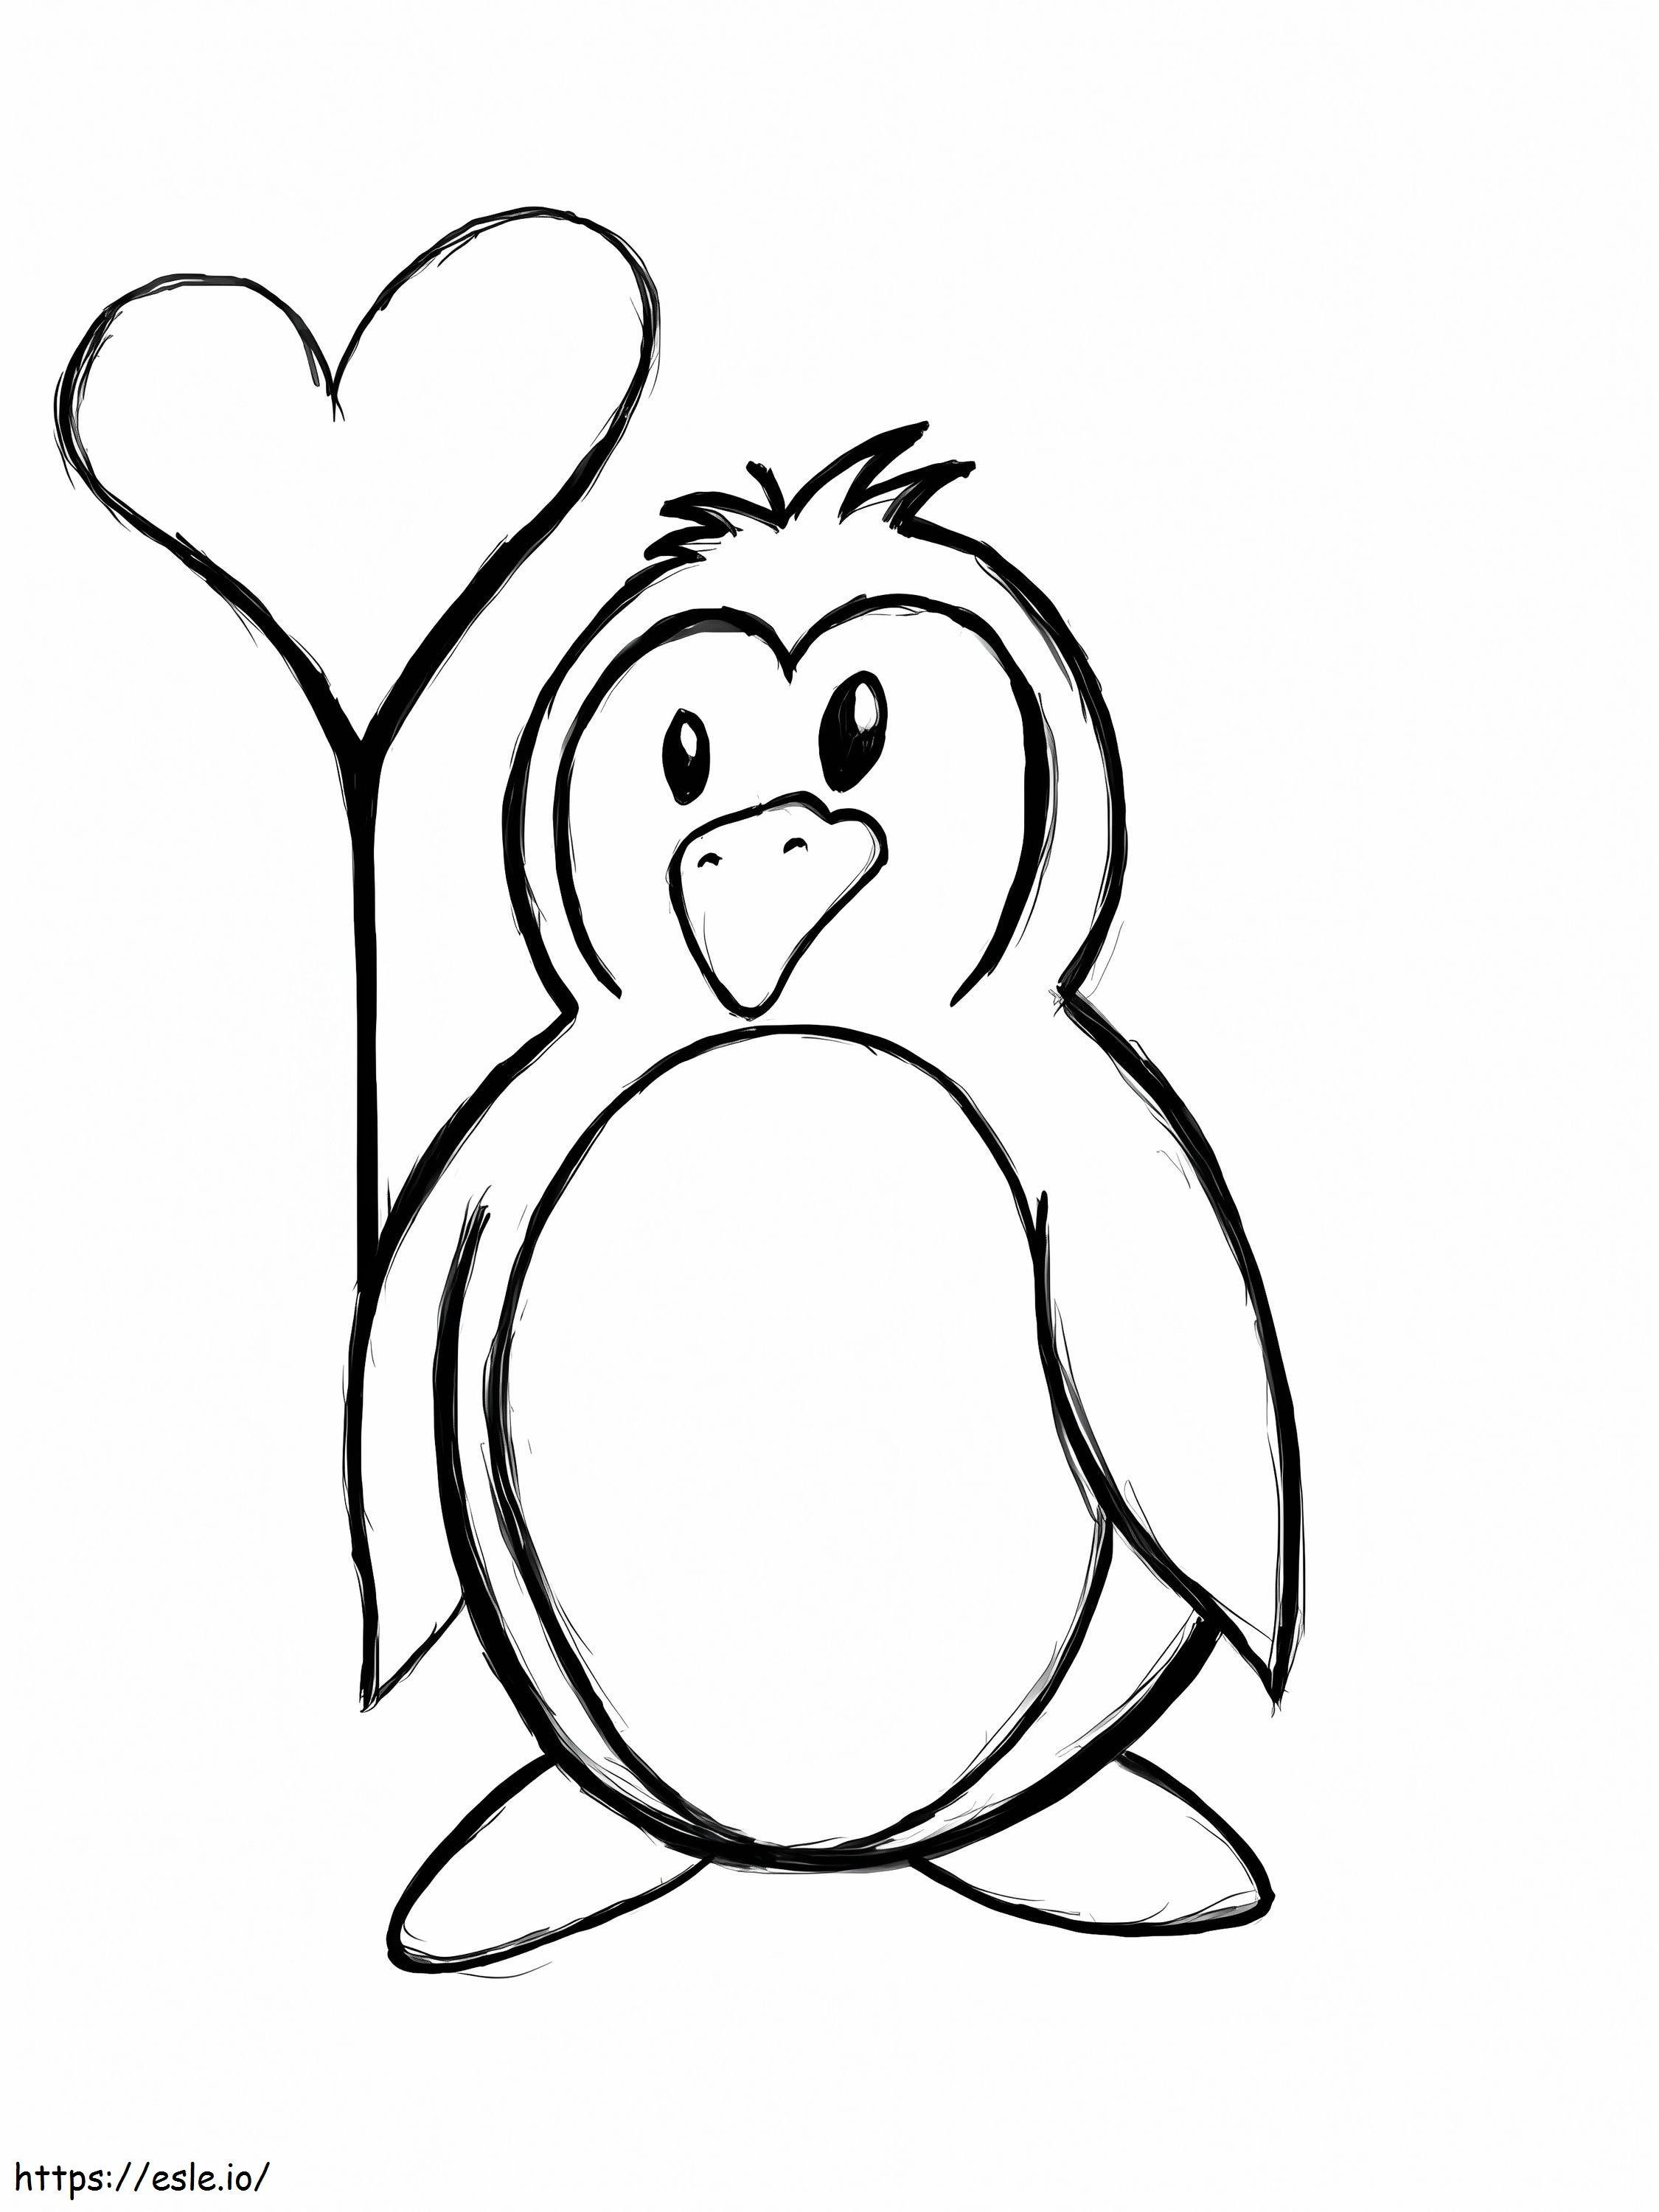 1548317179 F541Cd00Fce9Db630F9A39Fc81483249 Penguin Party Penguins coloring page